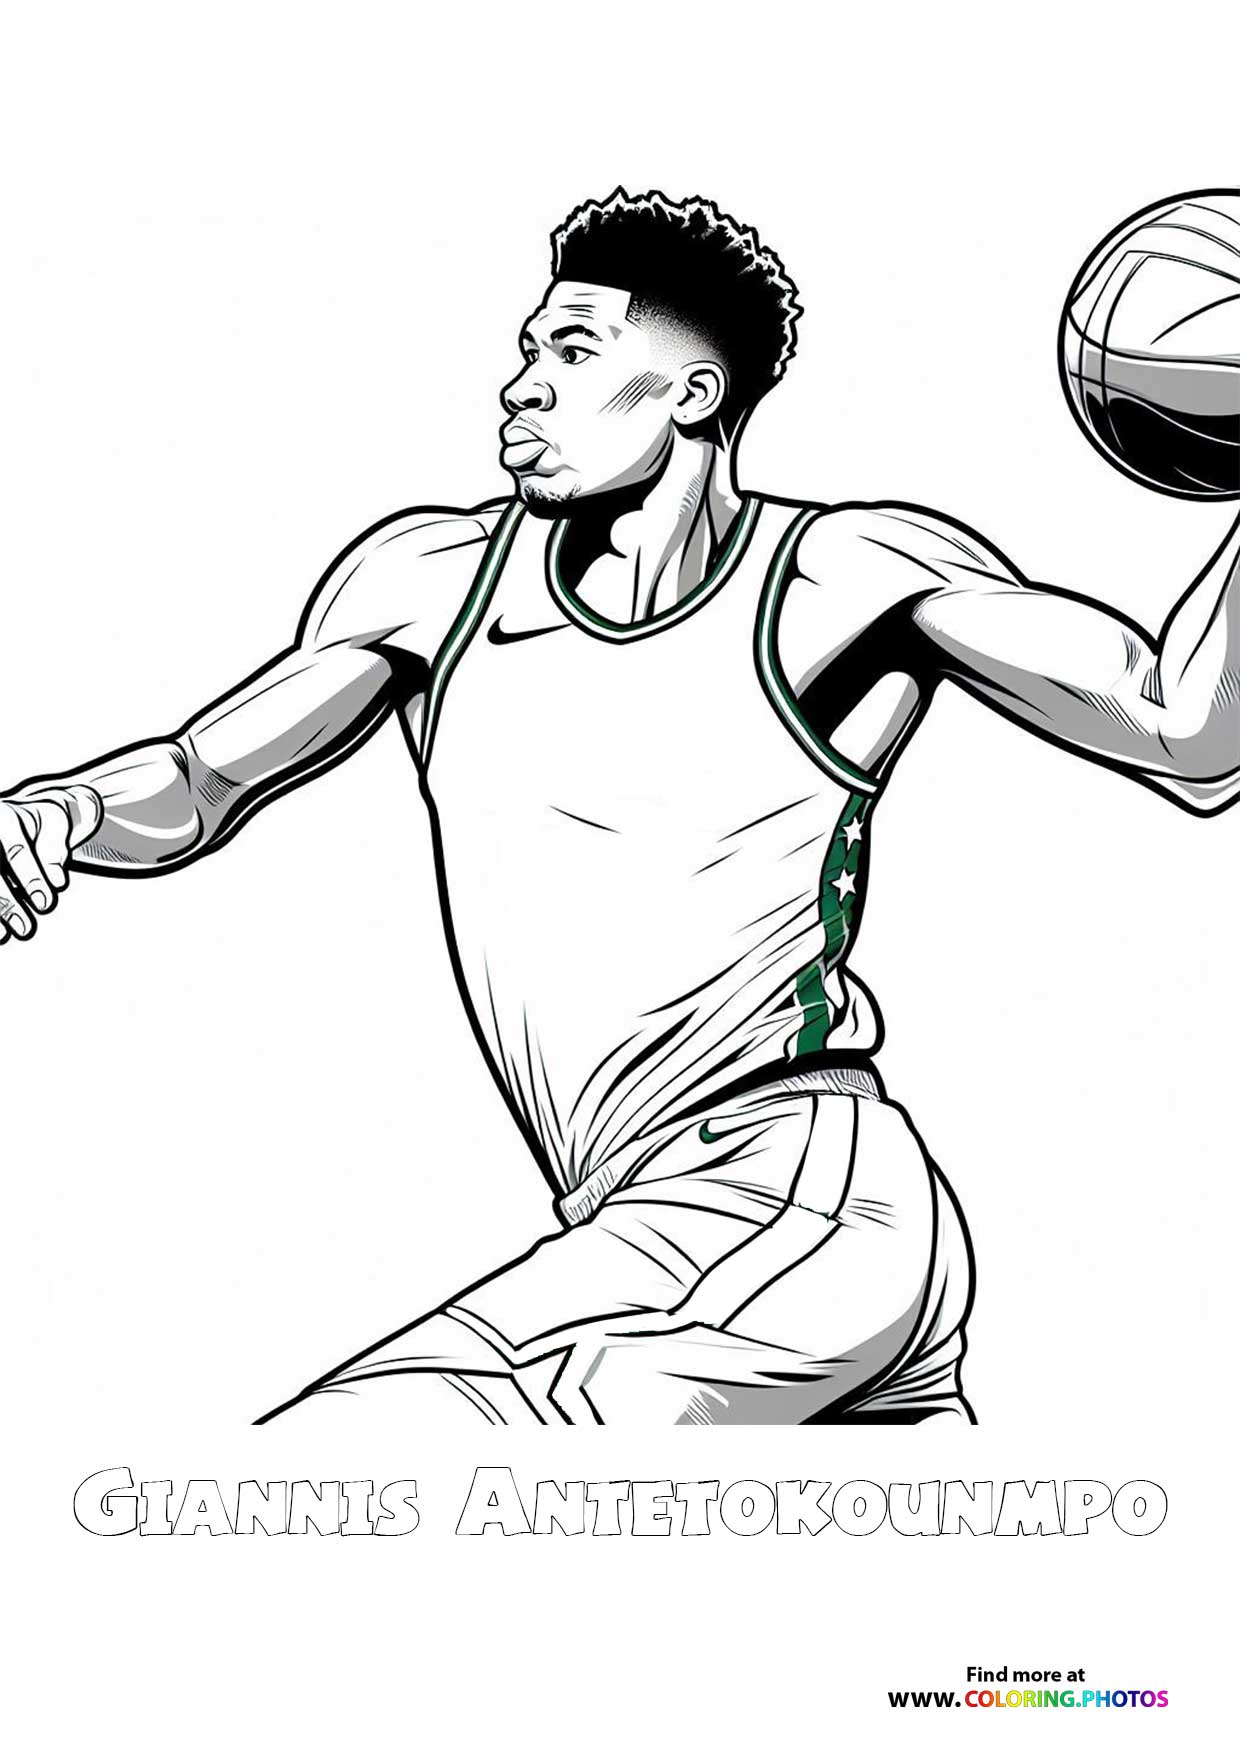 Giannis Antetokounmpo - Coloring Pages for kids | Free print or download